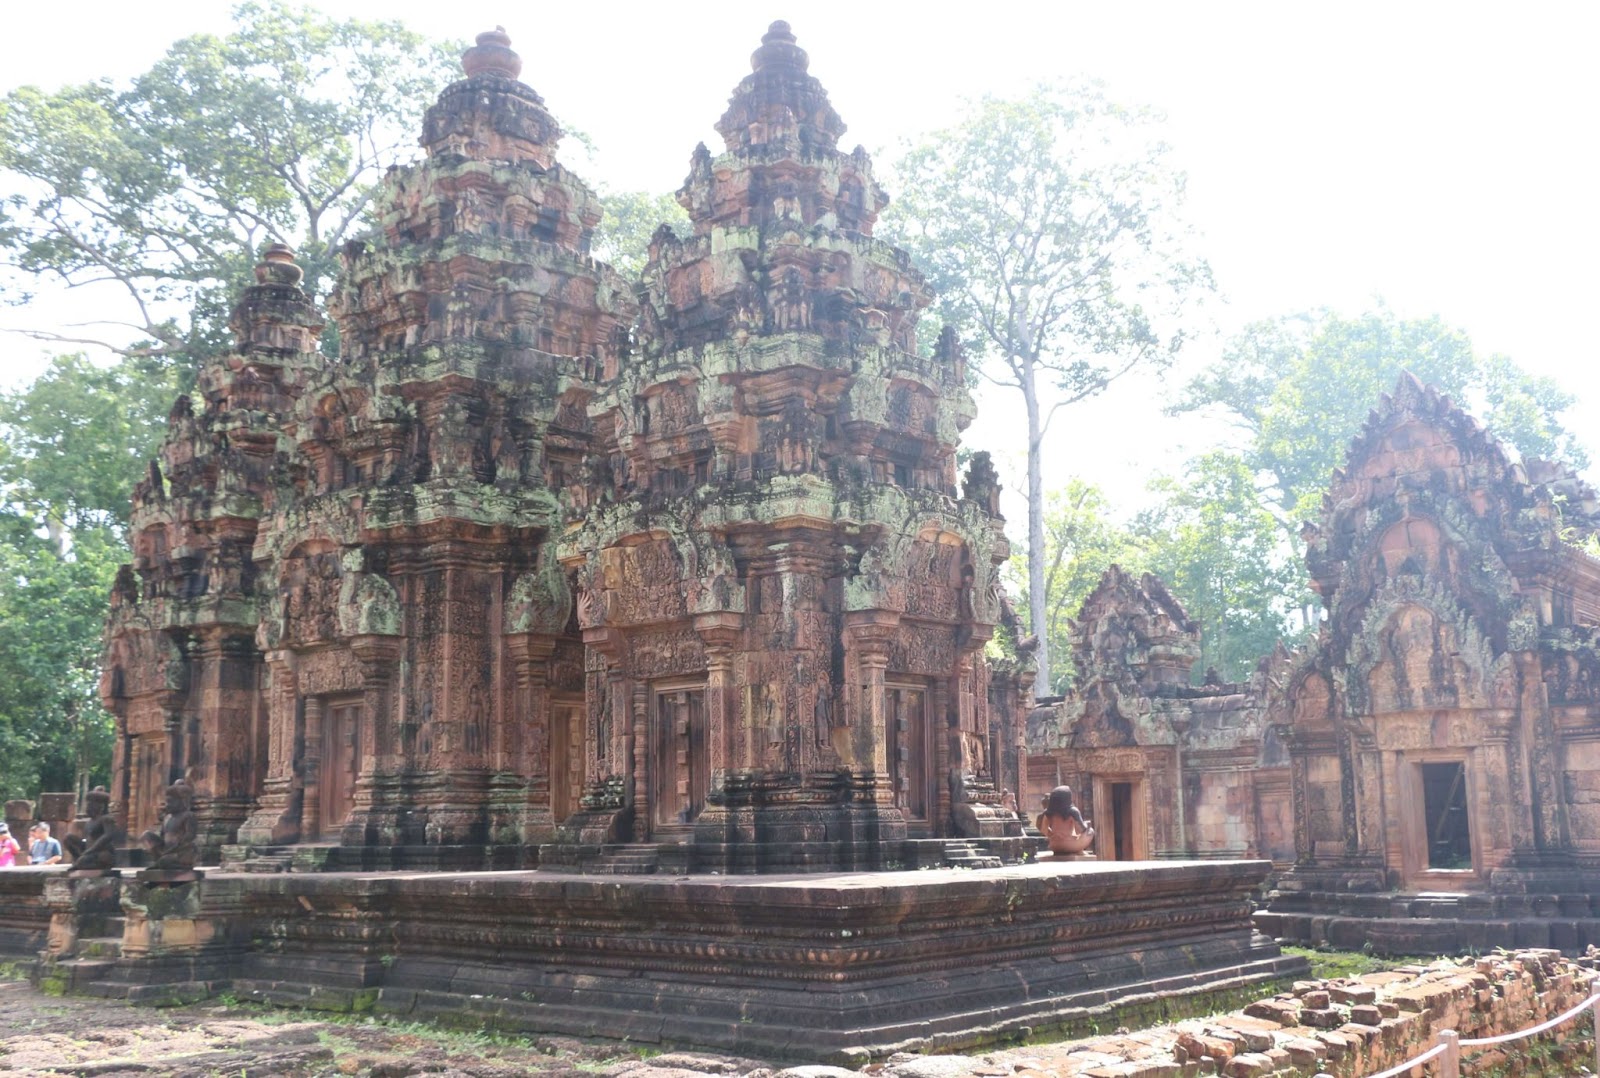 Banteay Srei was another beautiful temple we visited.